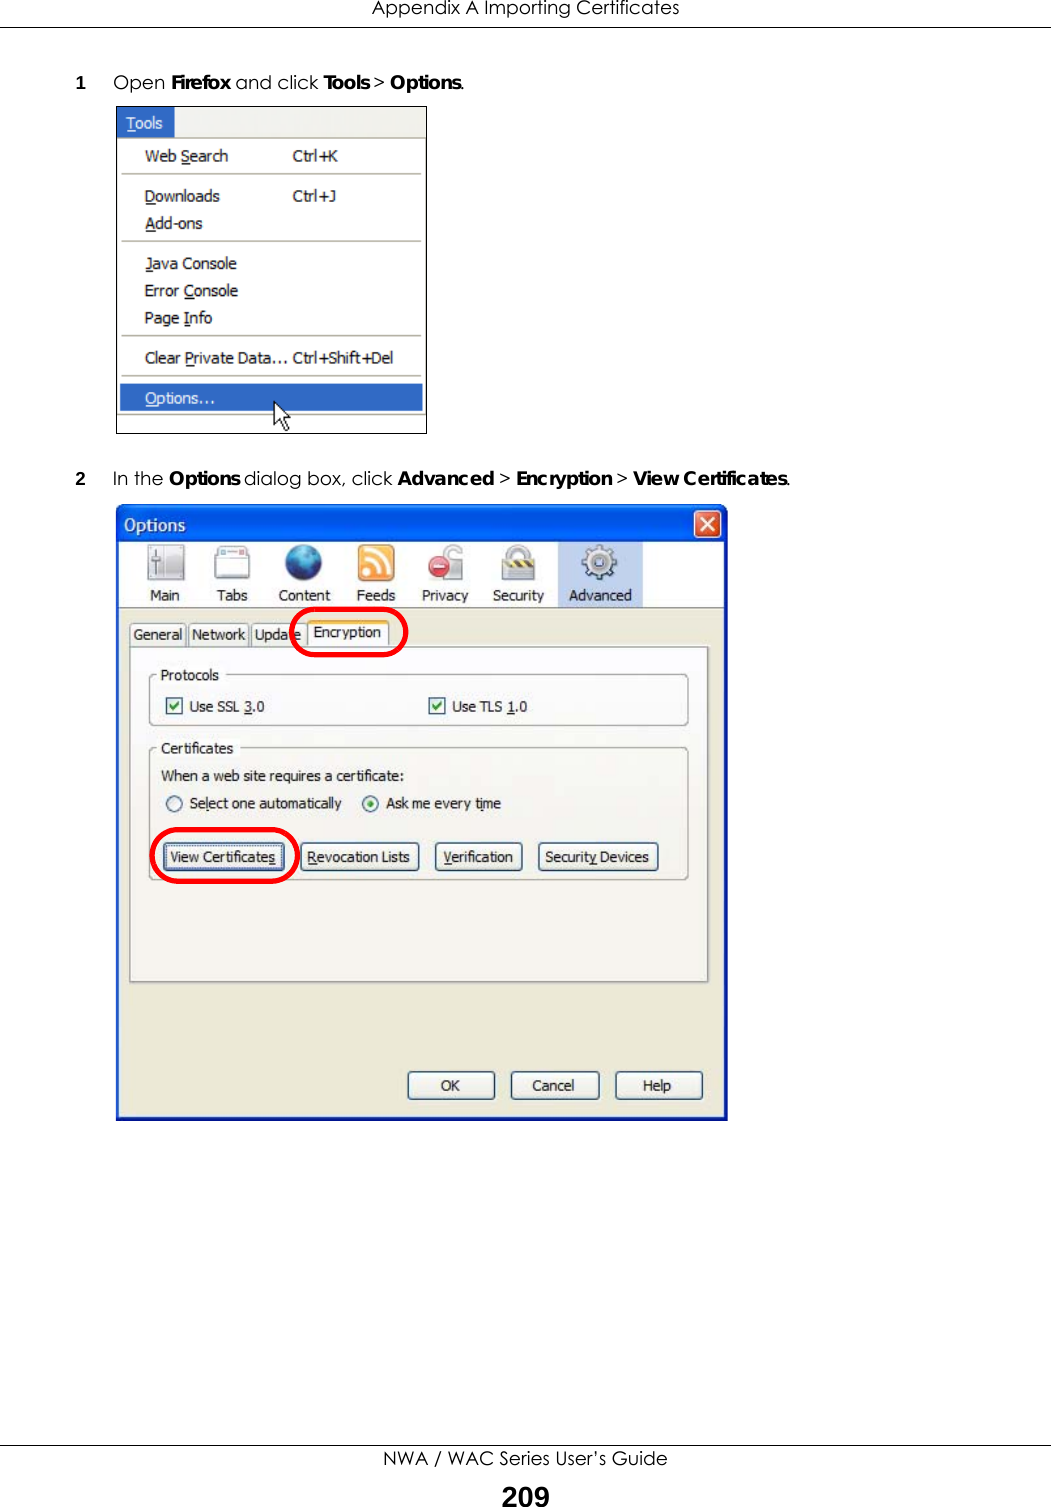 Appendix A Importing CertificatesNWA / WAC Series User’s Guide2091Open Firefox and click Tools &gt; Options.2In the Options dialog box, click Advanced &gt; Encryption &gt; View Certificates.